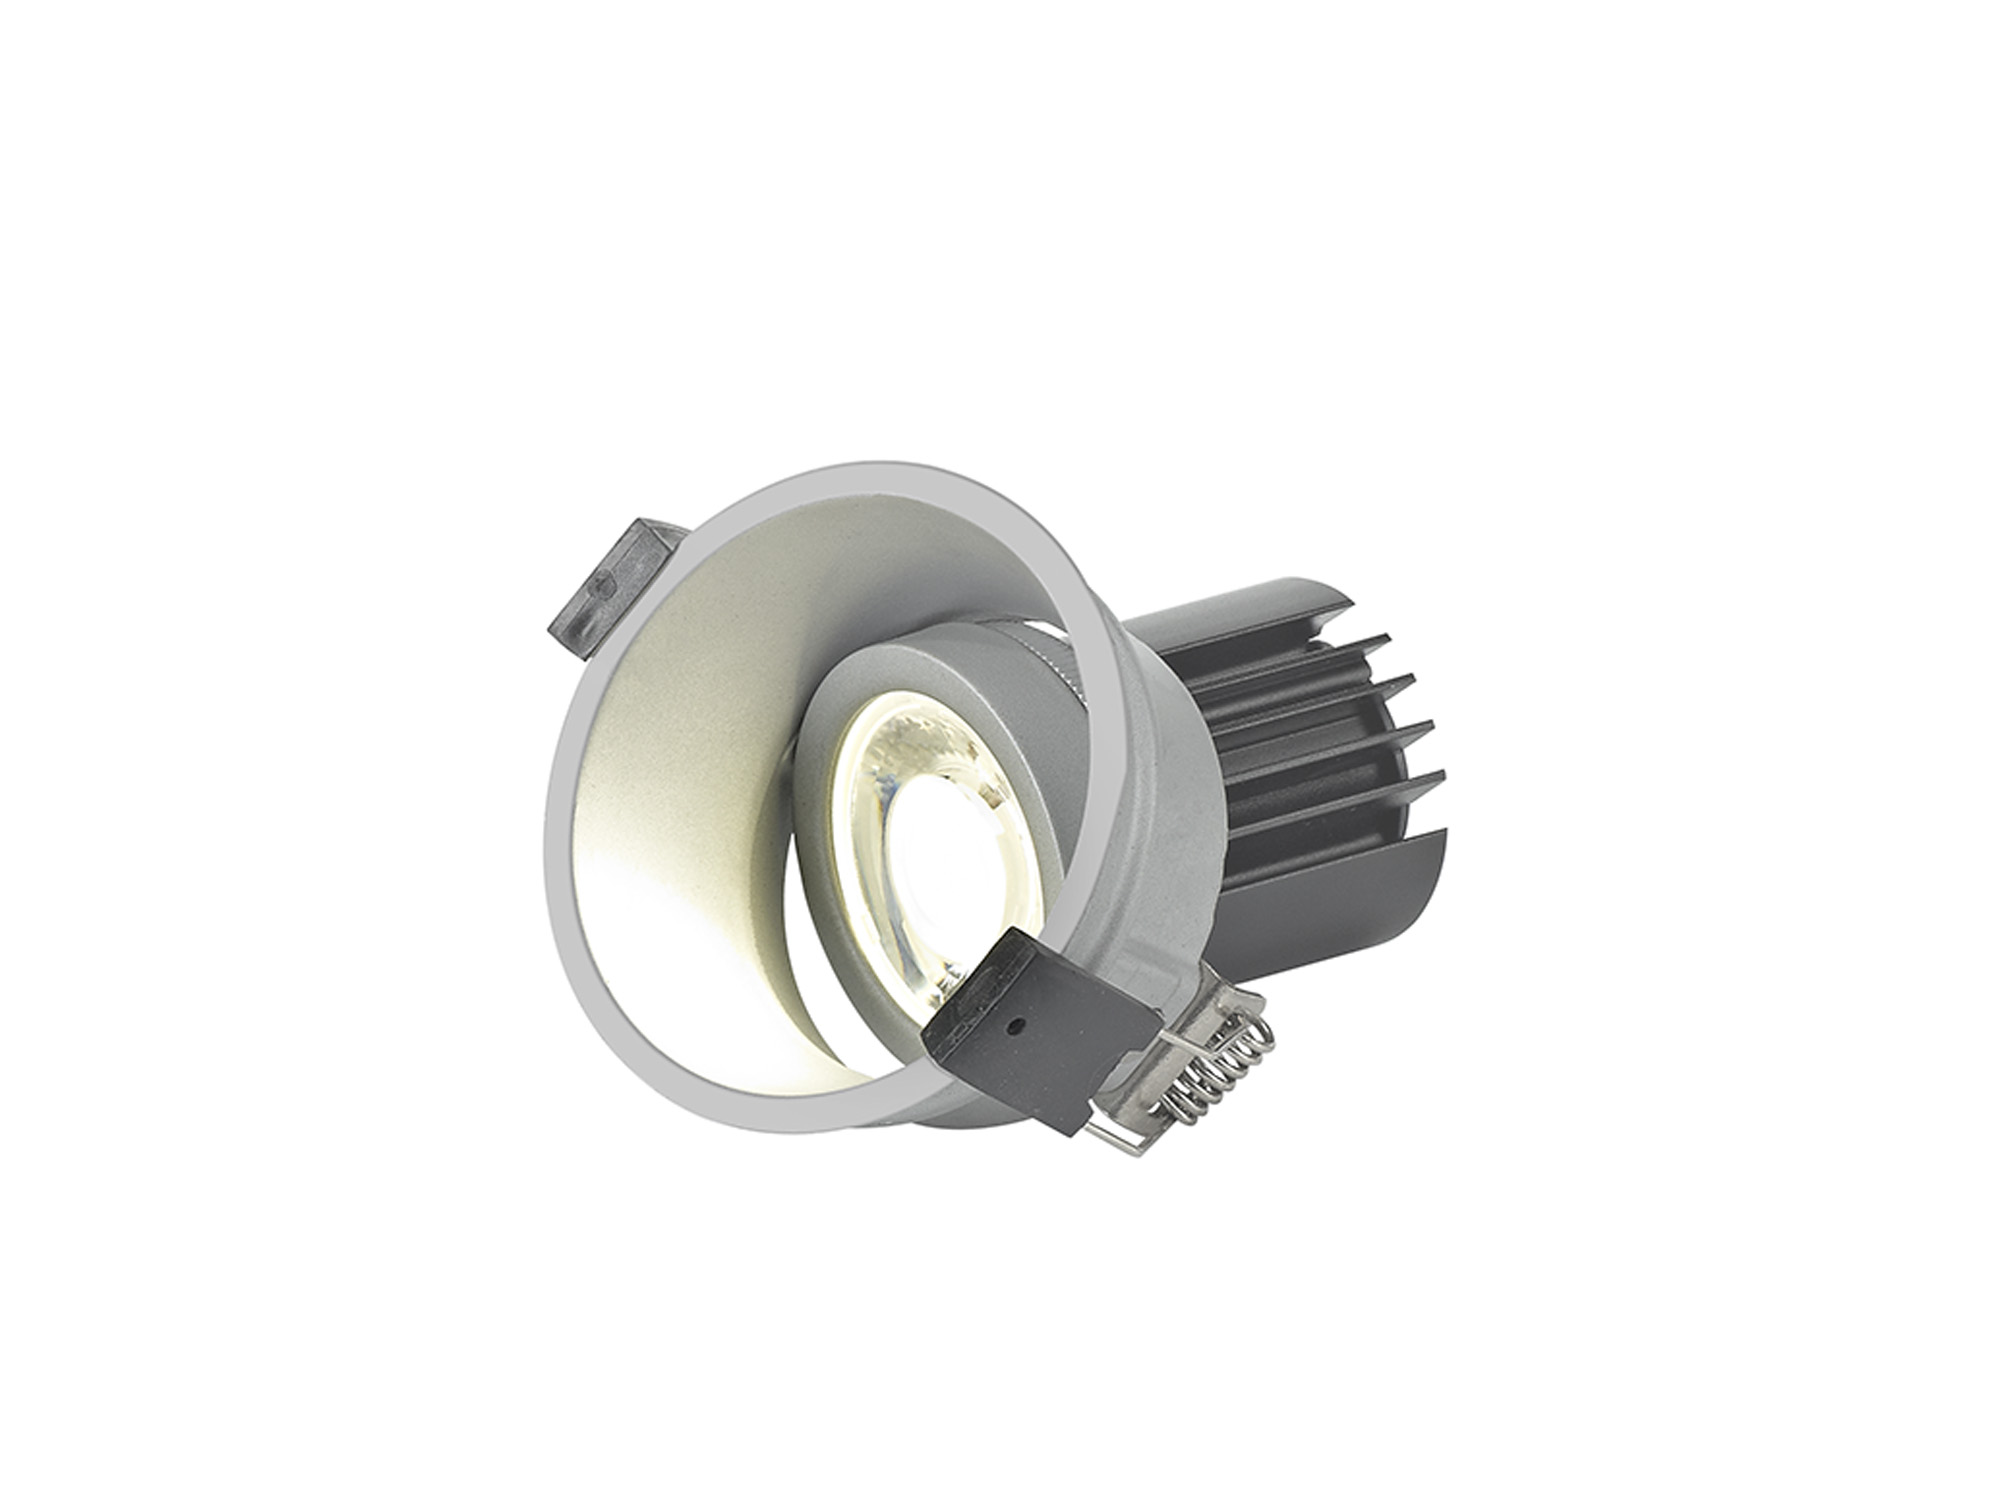 DM201664  Bania A 9 Powered by Tridonic  9W 2700K 770lm 24° CRI>90 LED Engine, 250mA Silver Adjustable Recessed Spotlight, IP20